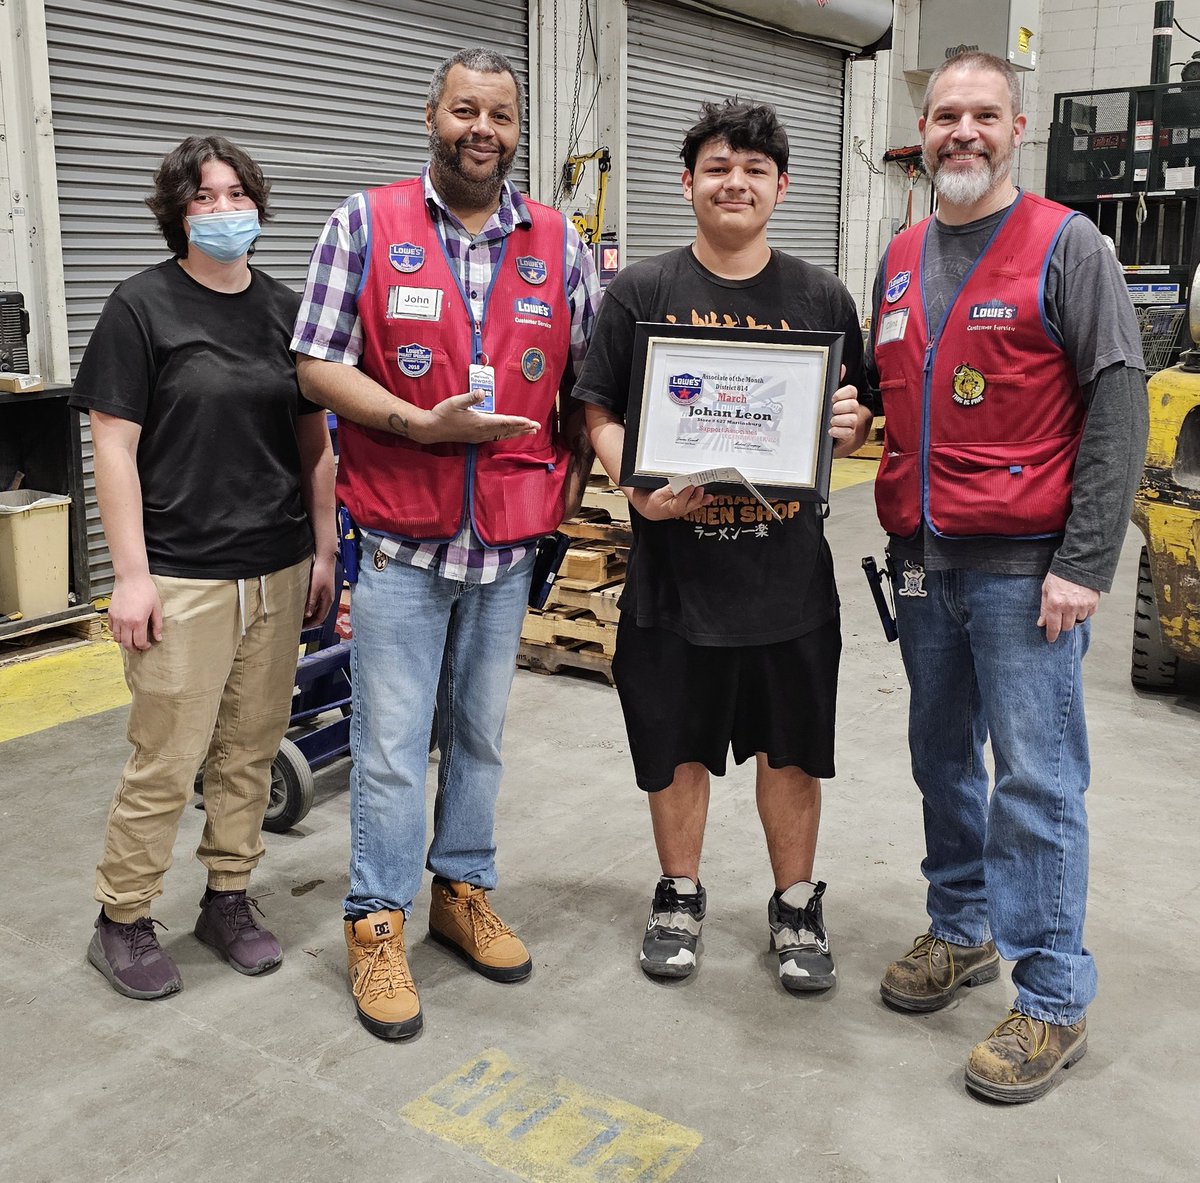 Congrats to Johan Leon for being voted Support Associate of The Month!!! Thanks for all you do. @BenitoKomadina @DustinCornell5 @MikeJDemps @lowes627 @BlueBoxR1